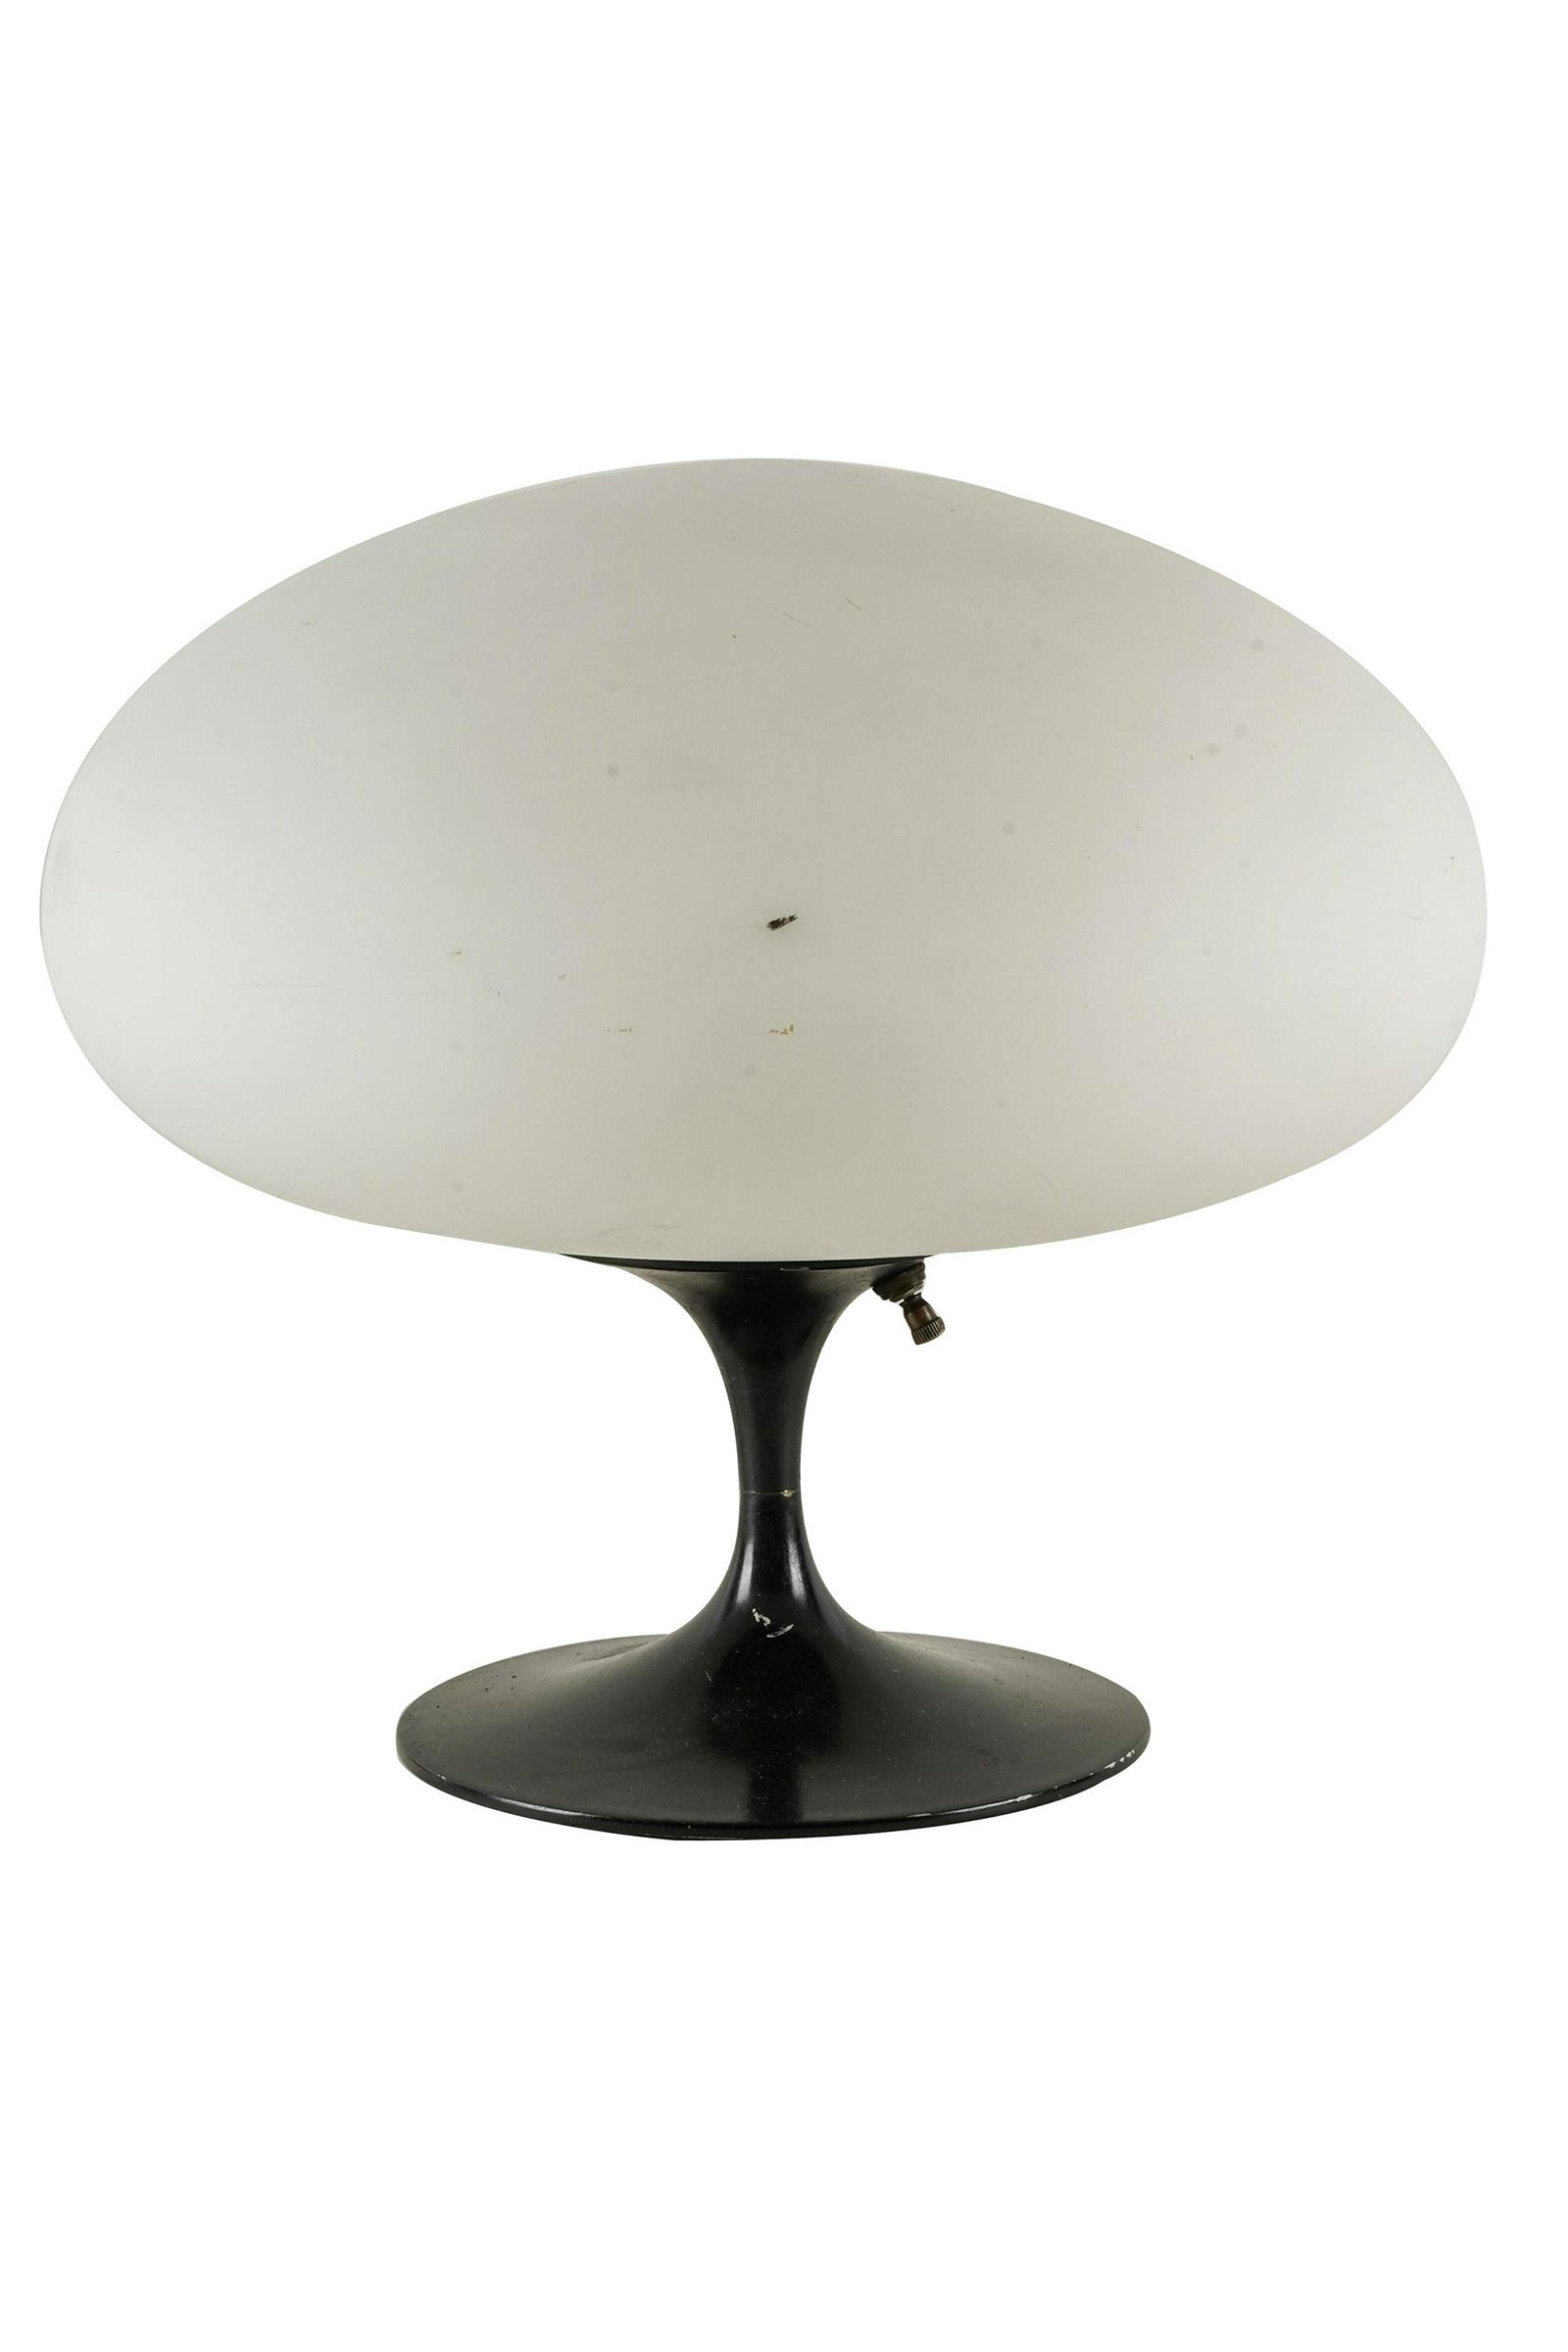 BILL CURRY TABLE LAMPthe frosted 397406